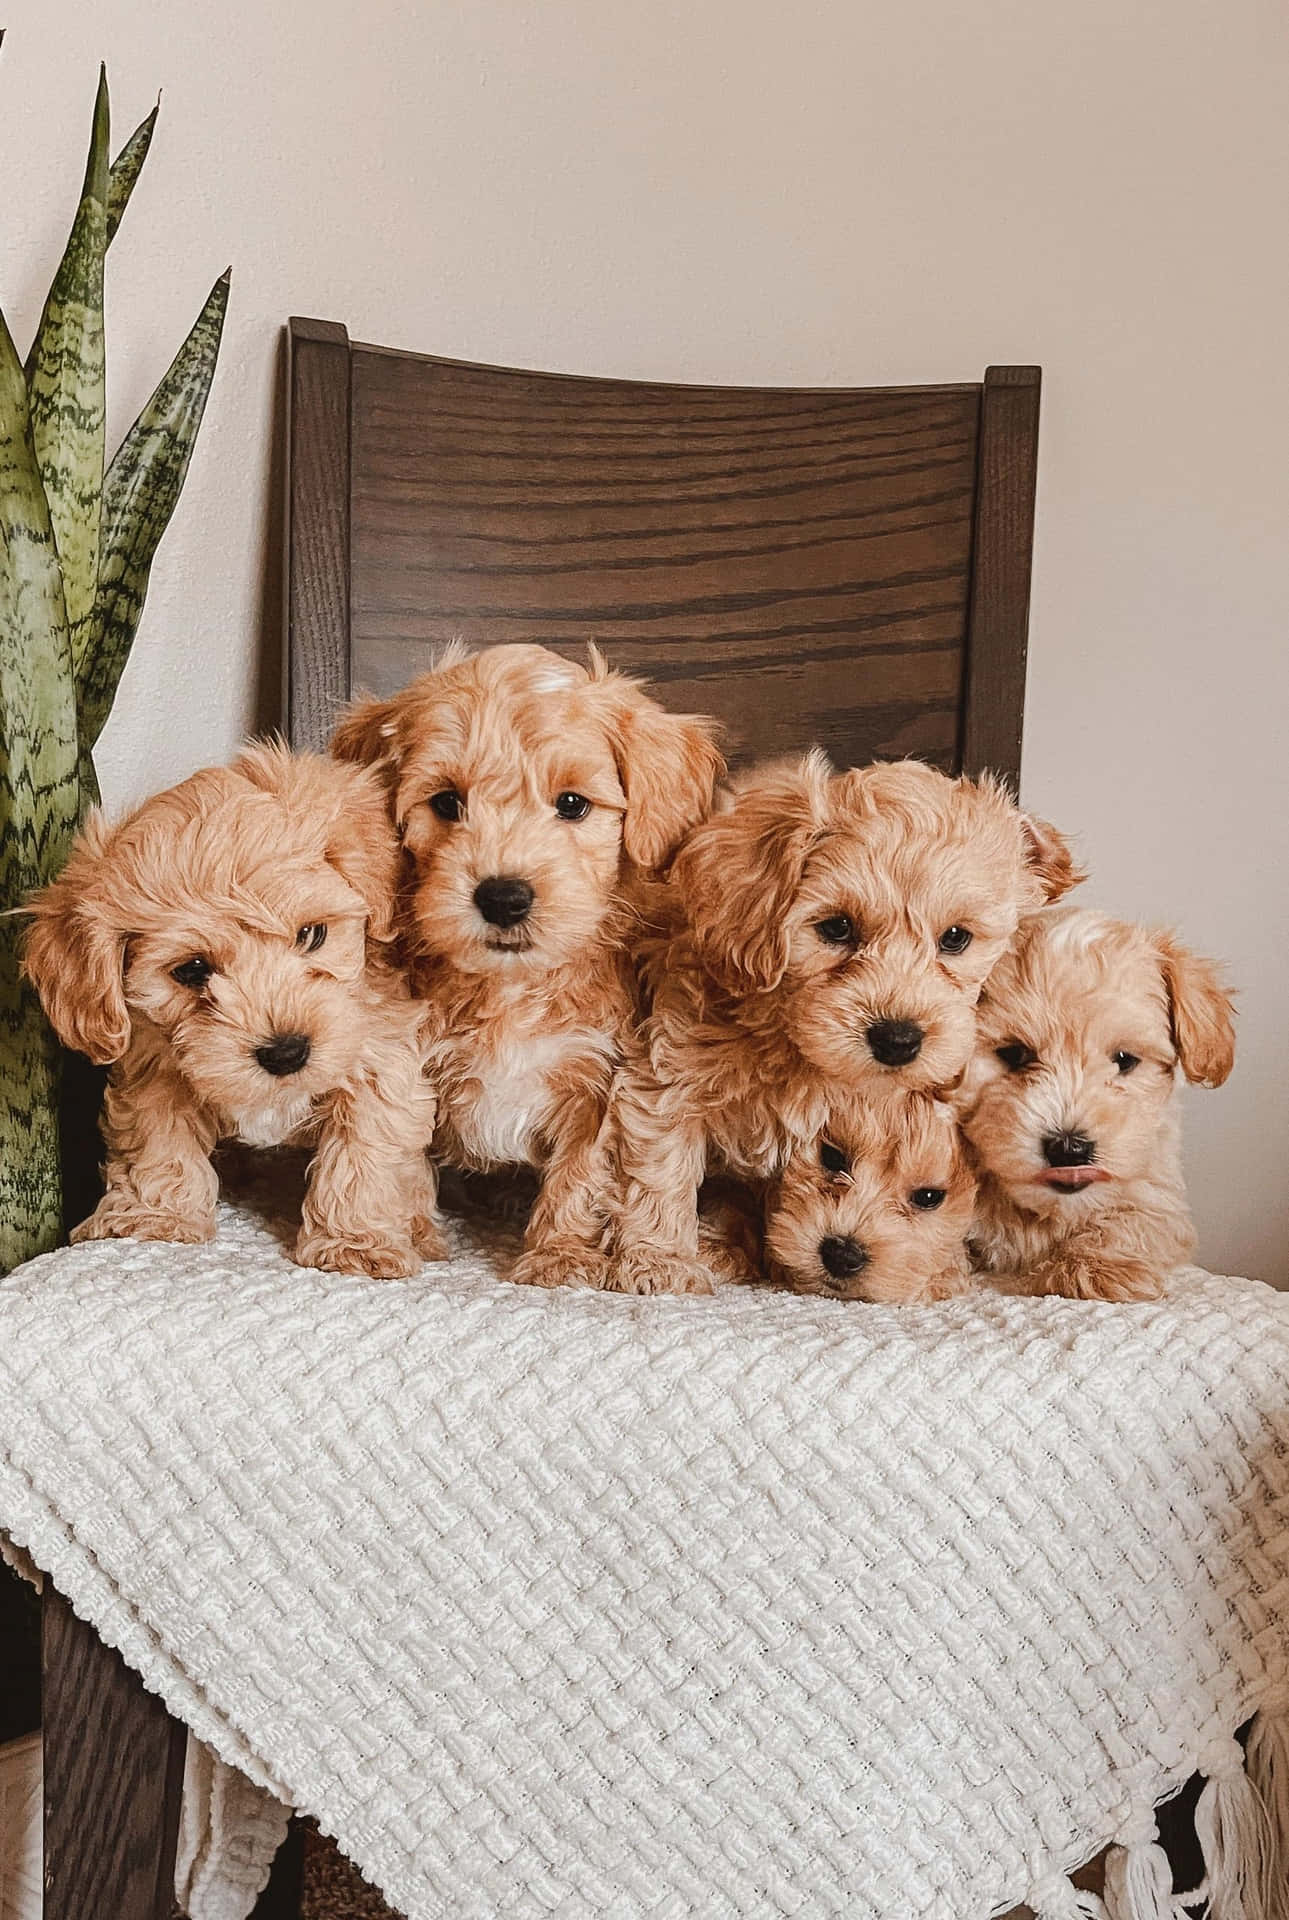 "Aww... meet these adorable little puppies!"